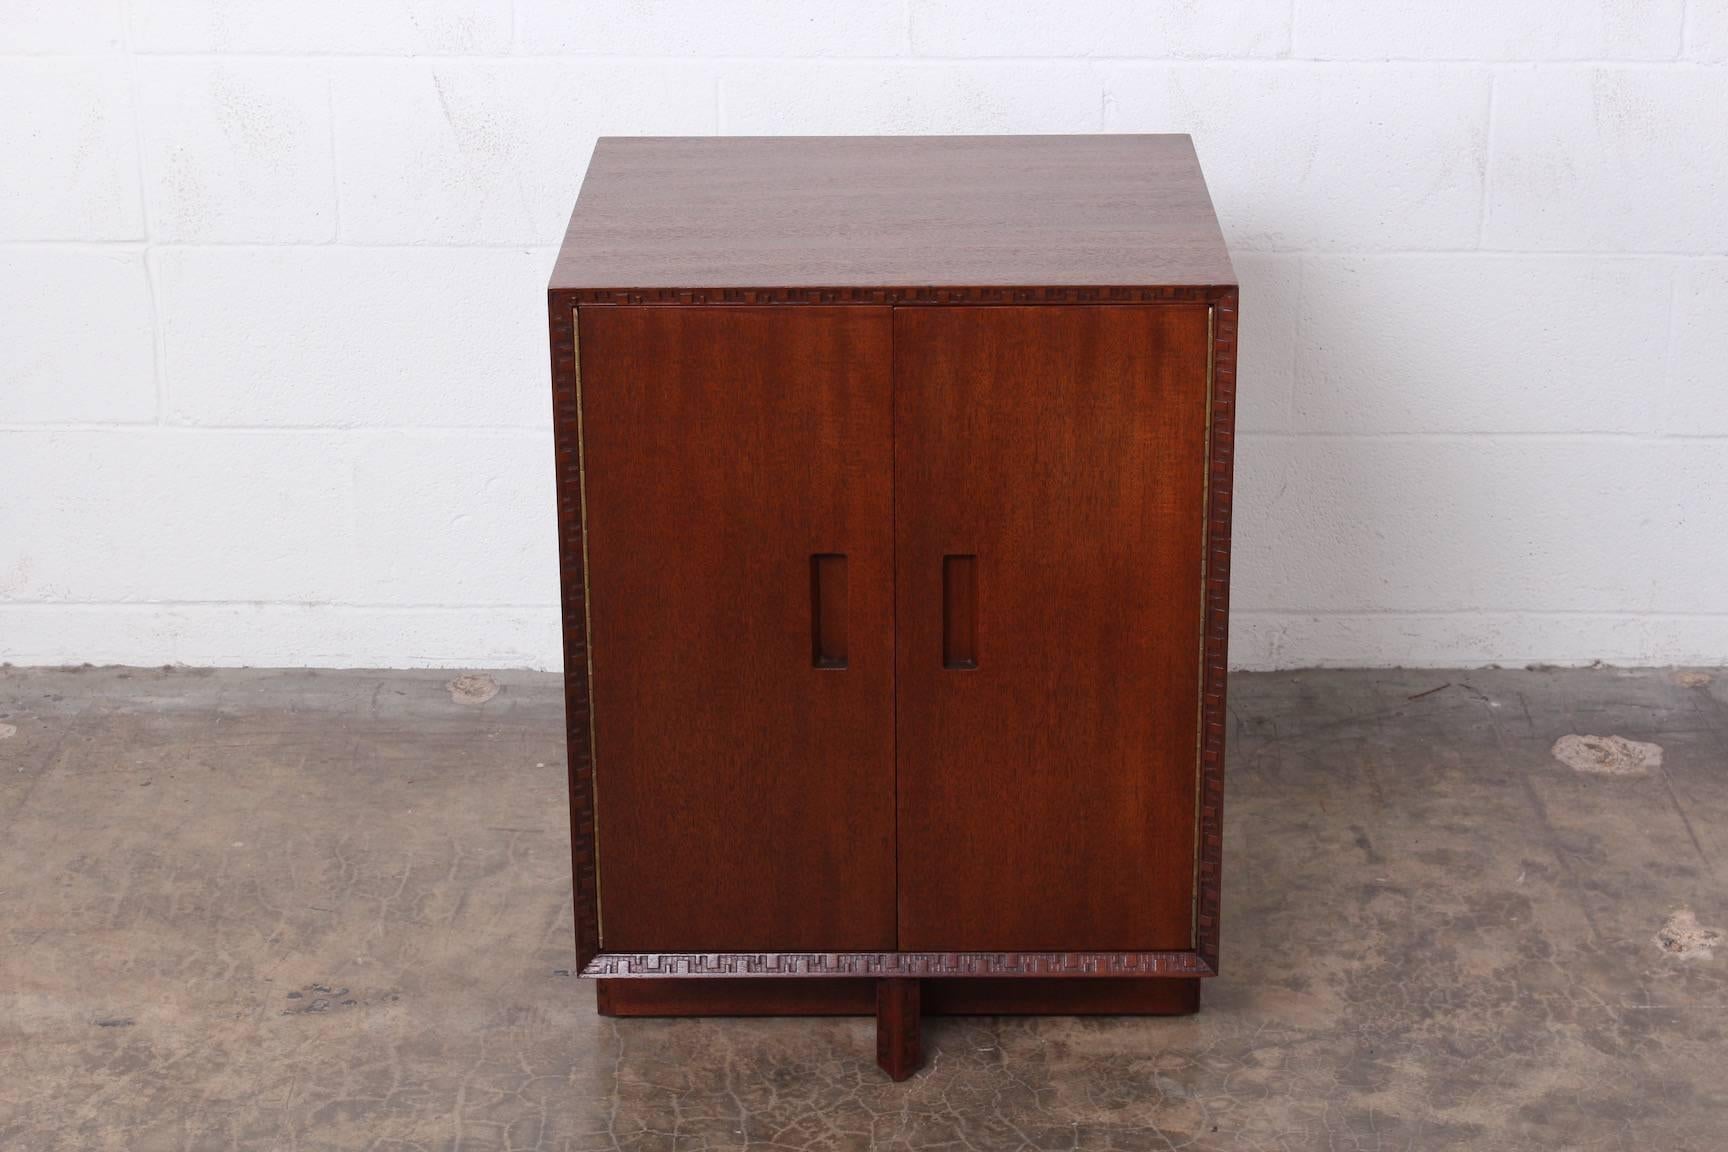 A two-door mahogany cabinet designed by Frank Lloyd Wright for Henredon.